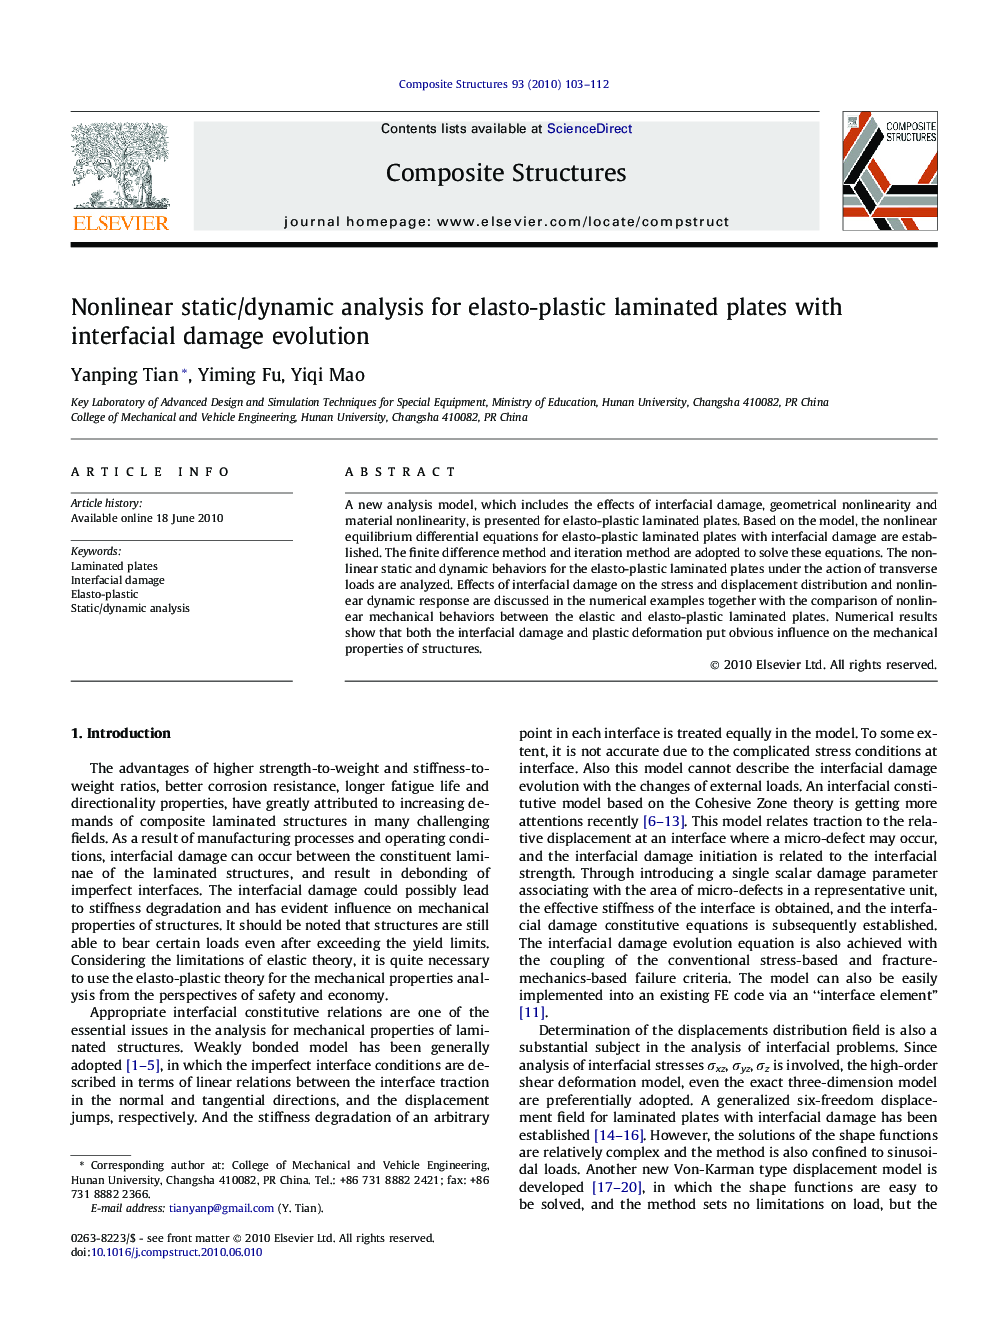 Nonlinear static/dynamic analysis for elasto-plastic laminated plates with interfacial damage evolution